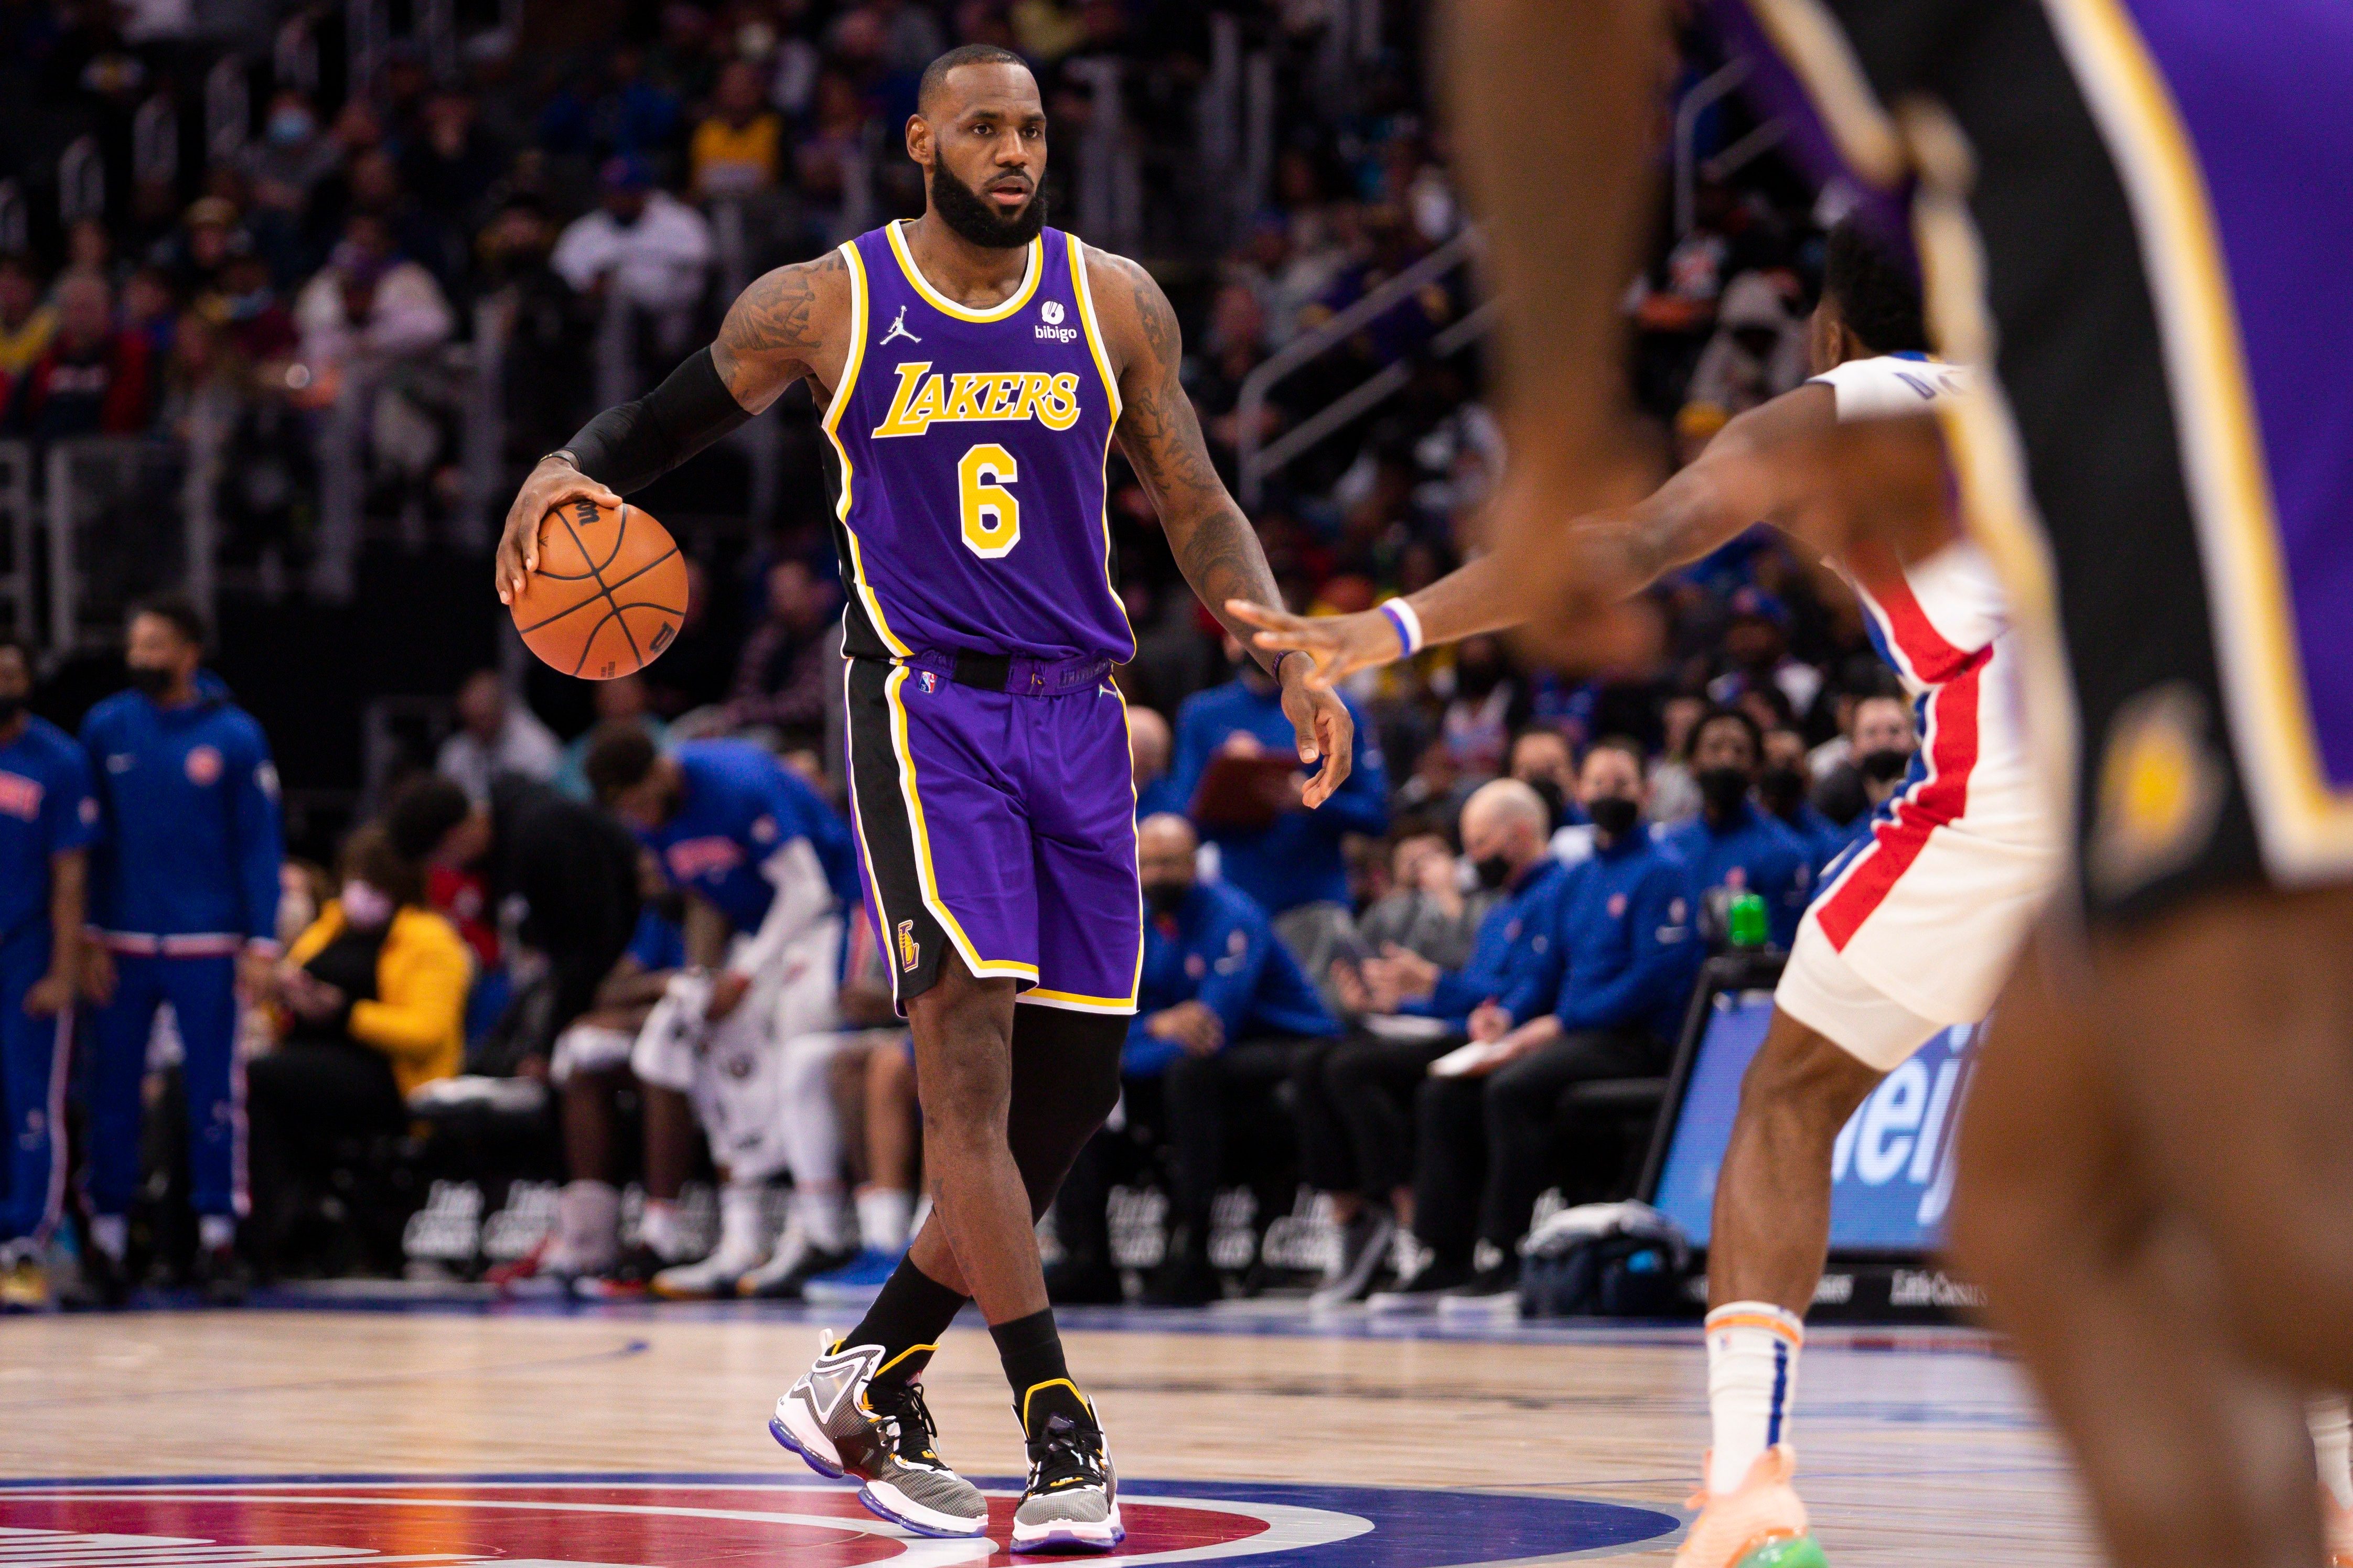 NBA suspends Lakers' LeBron James 1 game for striking Pistons